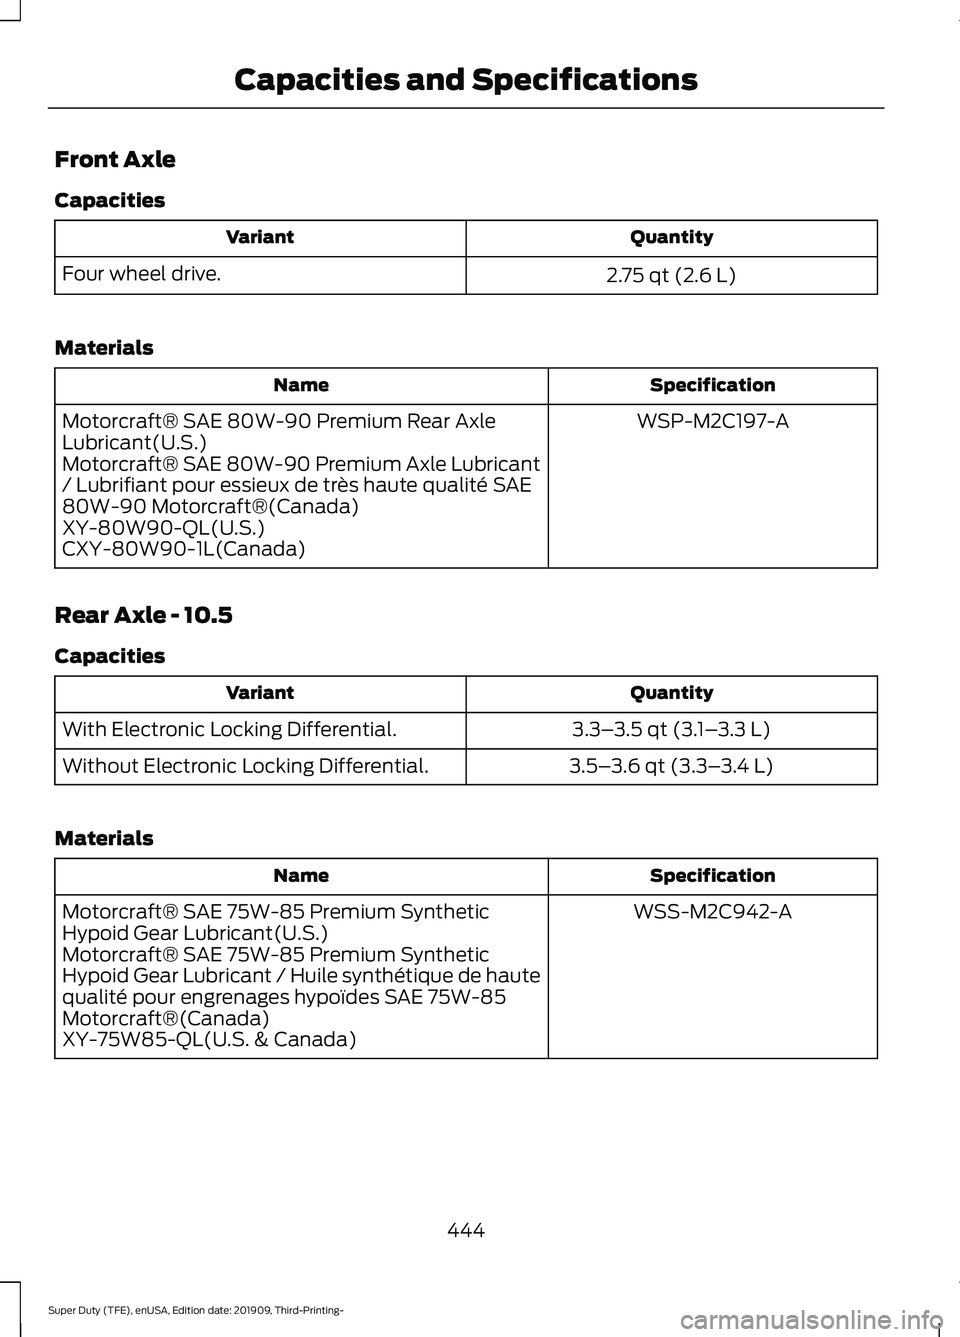 FORD F-550 2020  Owners Manual Front Axle
Capacities
Quantity
Variant
2.75 qt (2.6 L)
Four wheel drive.
Materials Specification
Name
WSP-M2C197-A
Motorcraft® SAE 80W-90 Premium Rear Axle
Lubricant(U.S.)
Motorcraft® SAE 80W-90 Pre